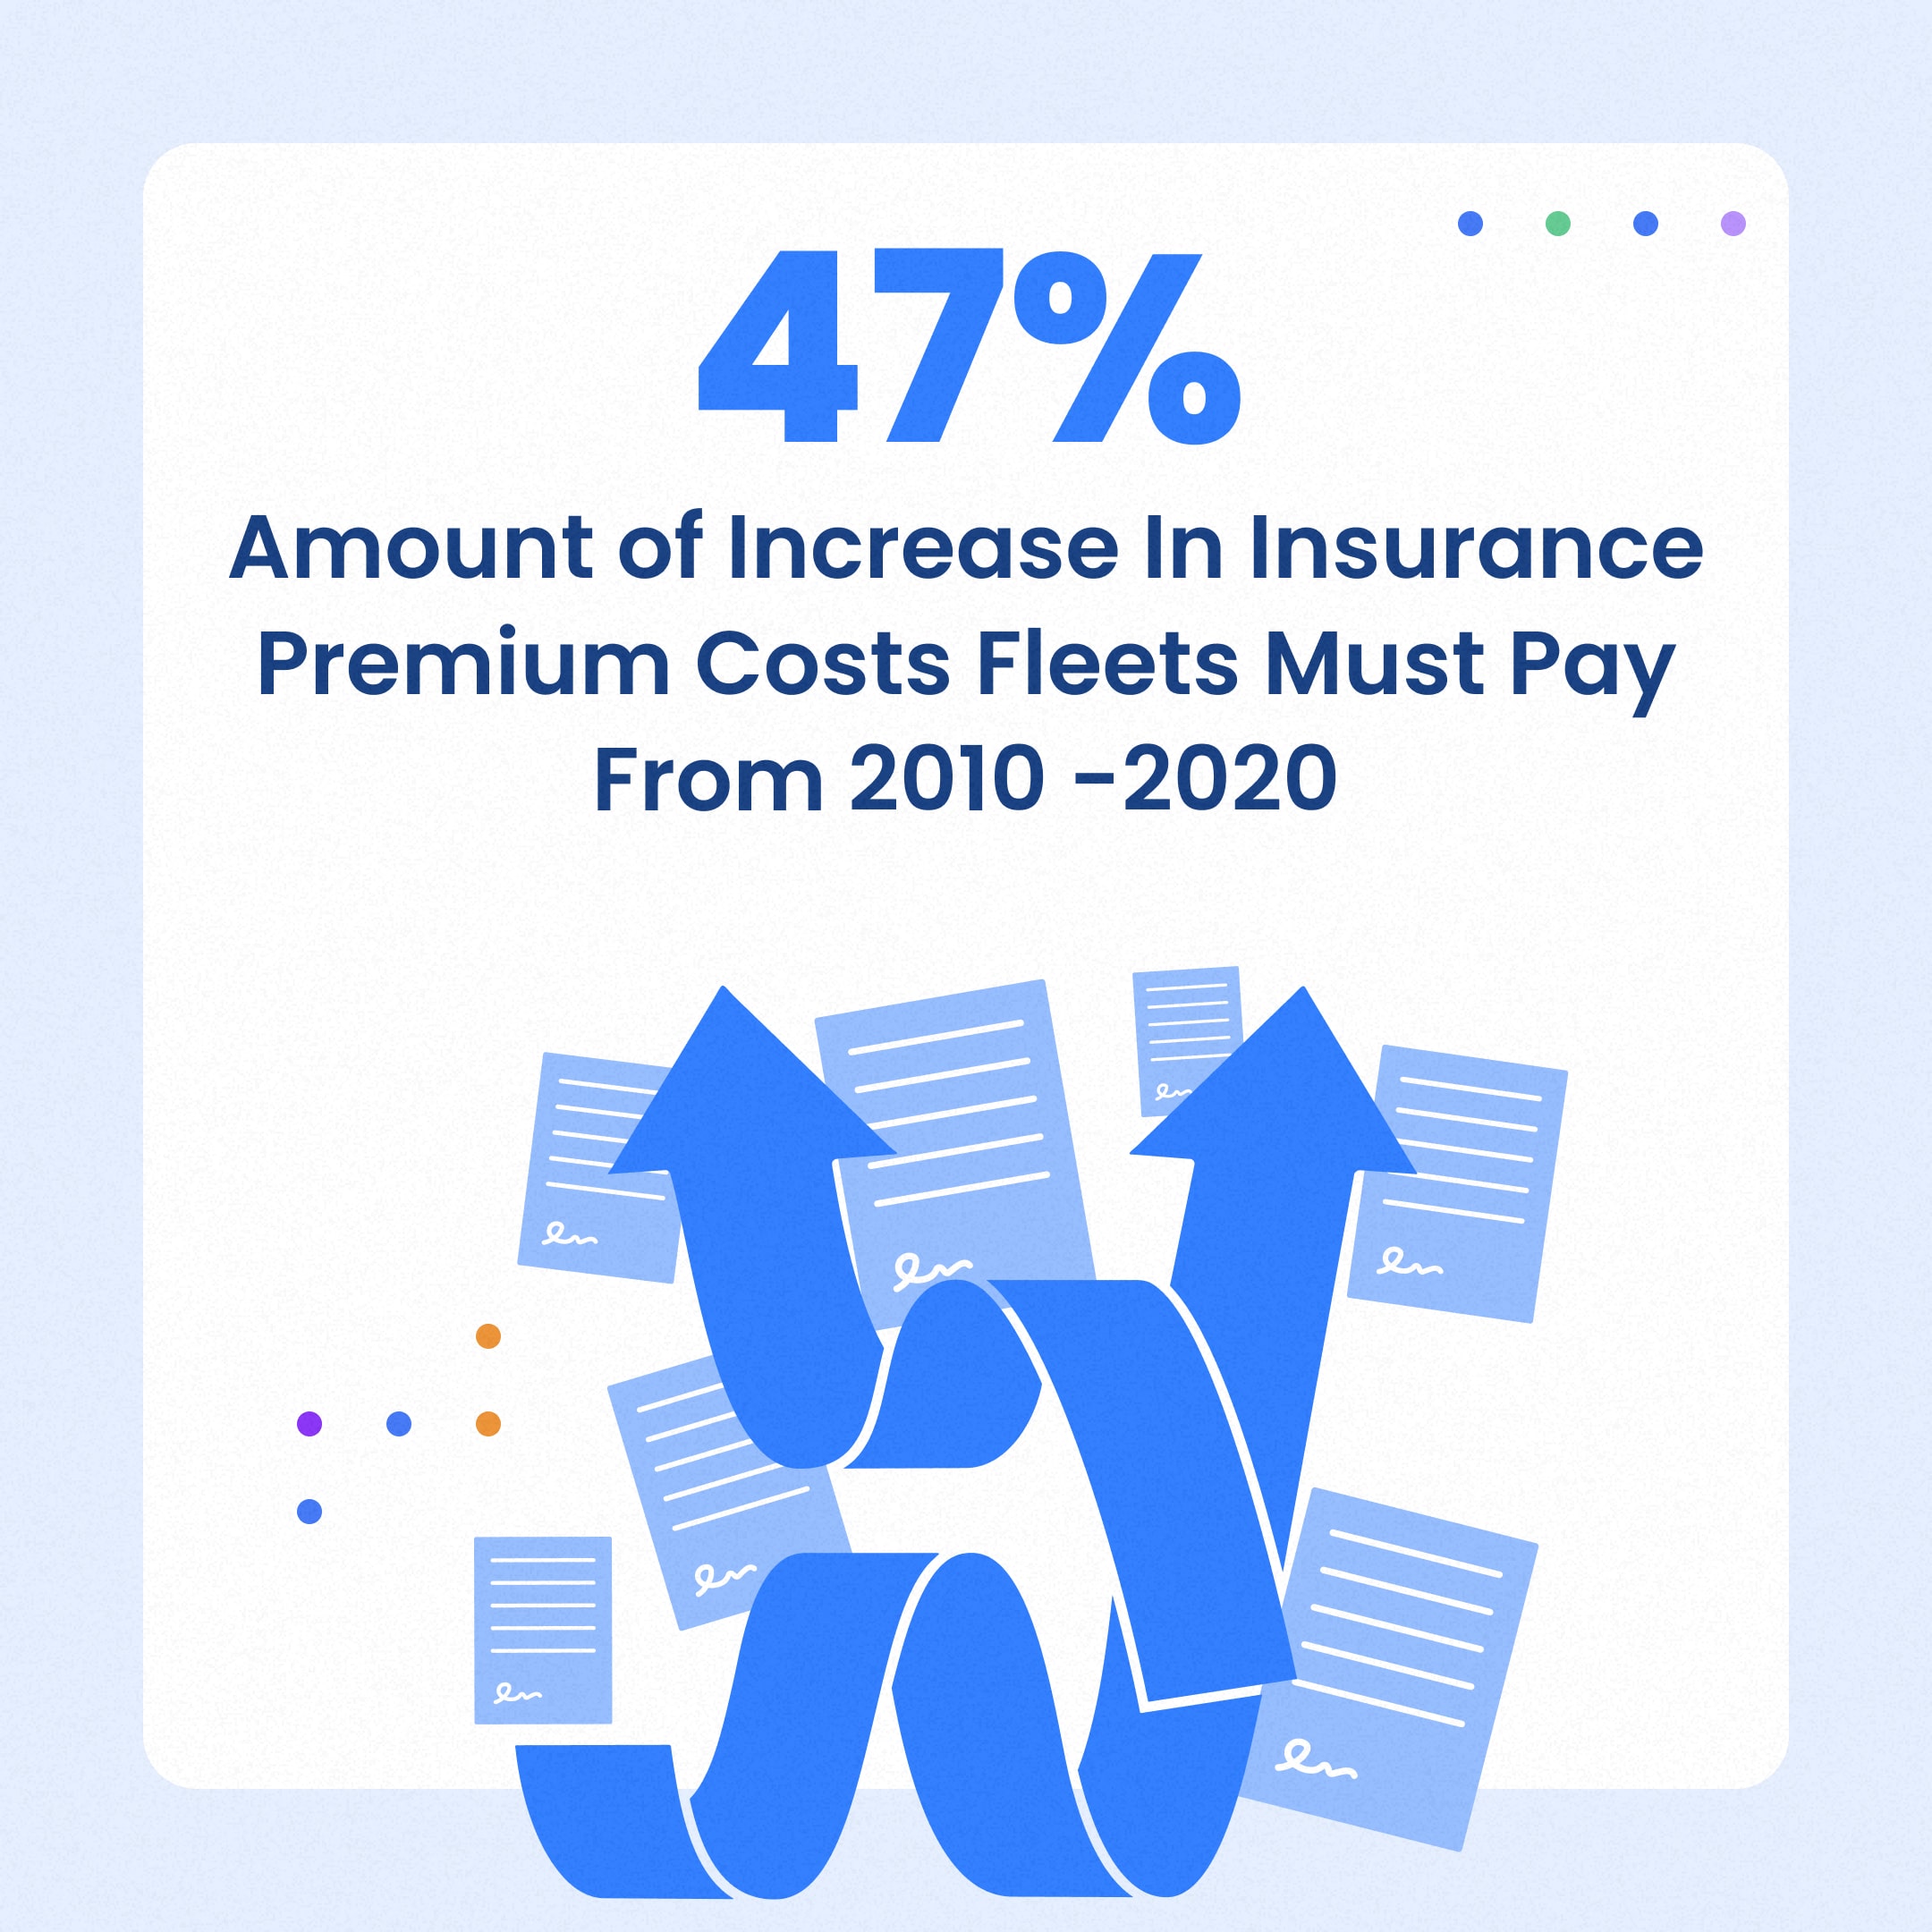 ATRI’s research in 2022 on rising insurance costs documented a 47% increase in insurance premium costs per mile between 2010 and 2020.